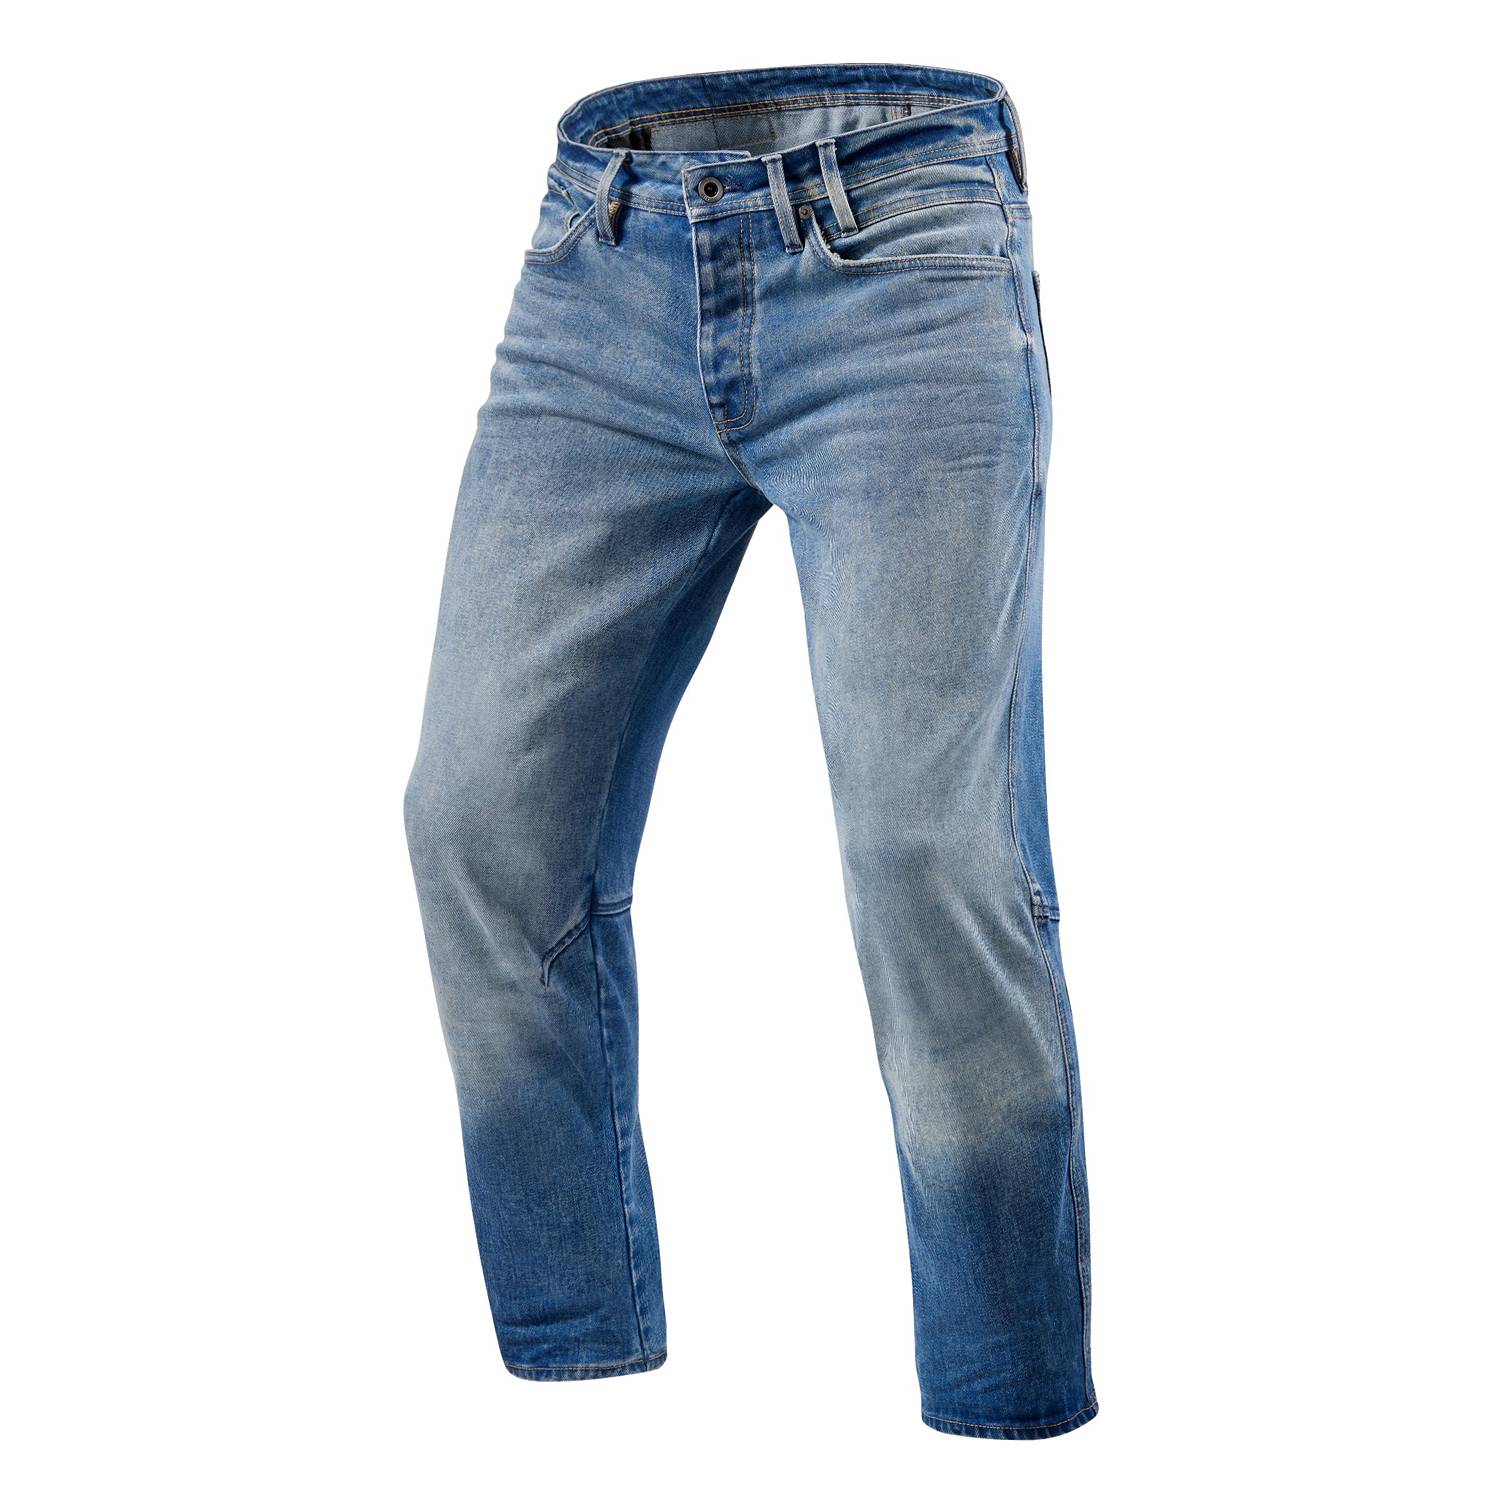 Image of REV'IT! Salt TF Mid Blue Used Motorcycle Jeans Size L36/W38 ID 8700001339285